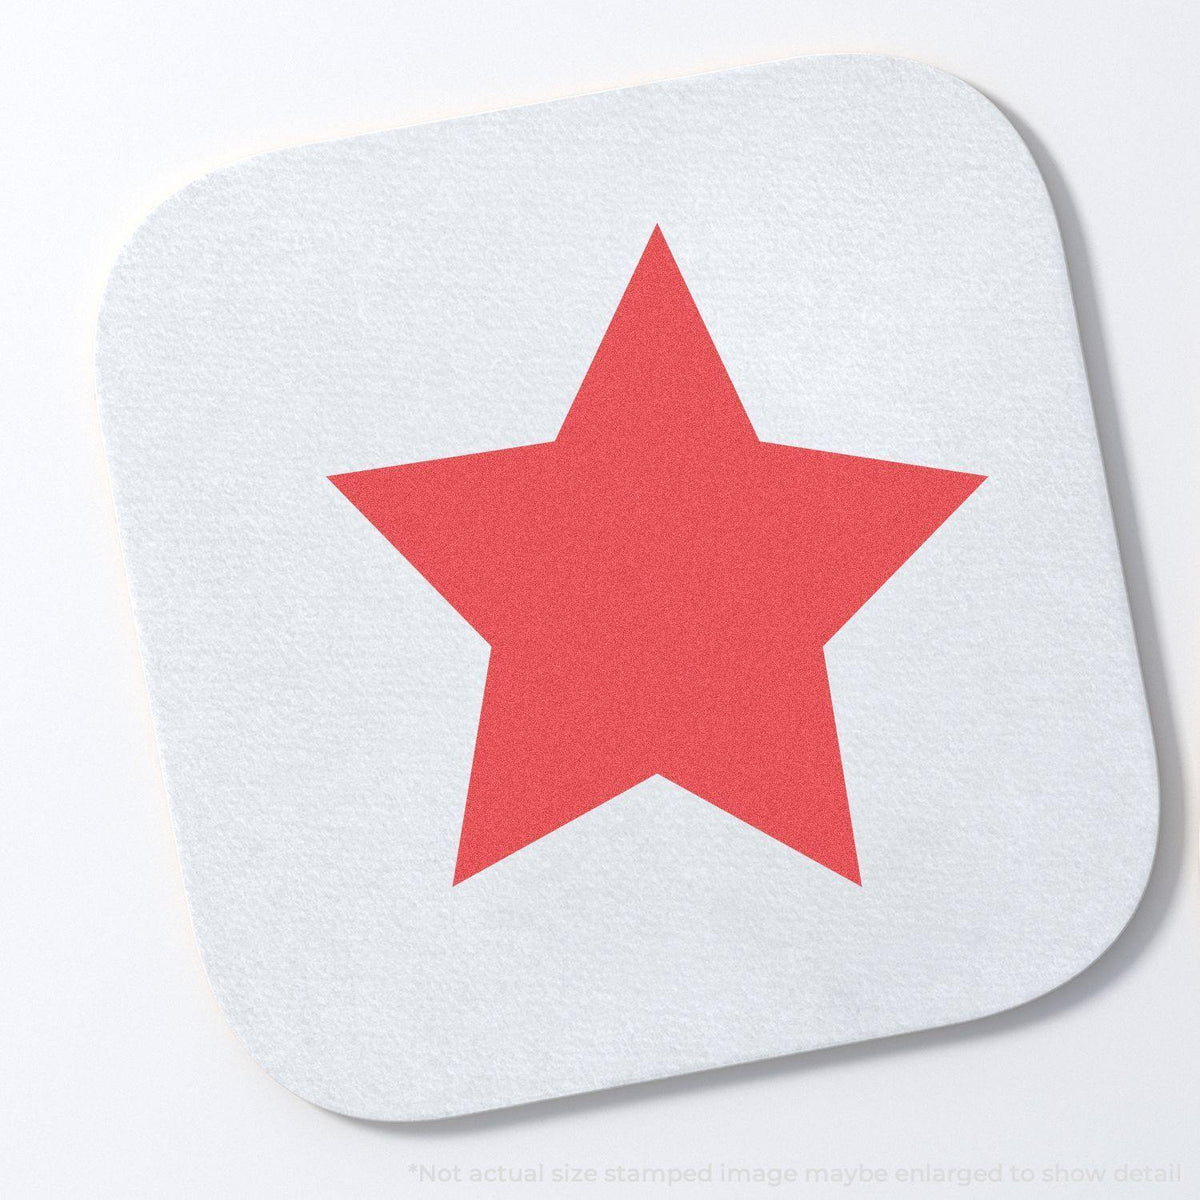 In Use Photo of Round Red Star Xstamper Stamp